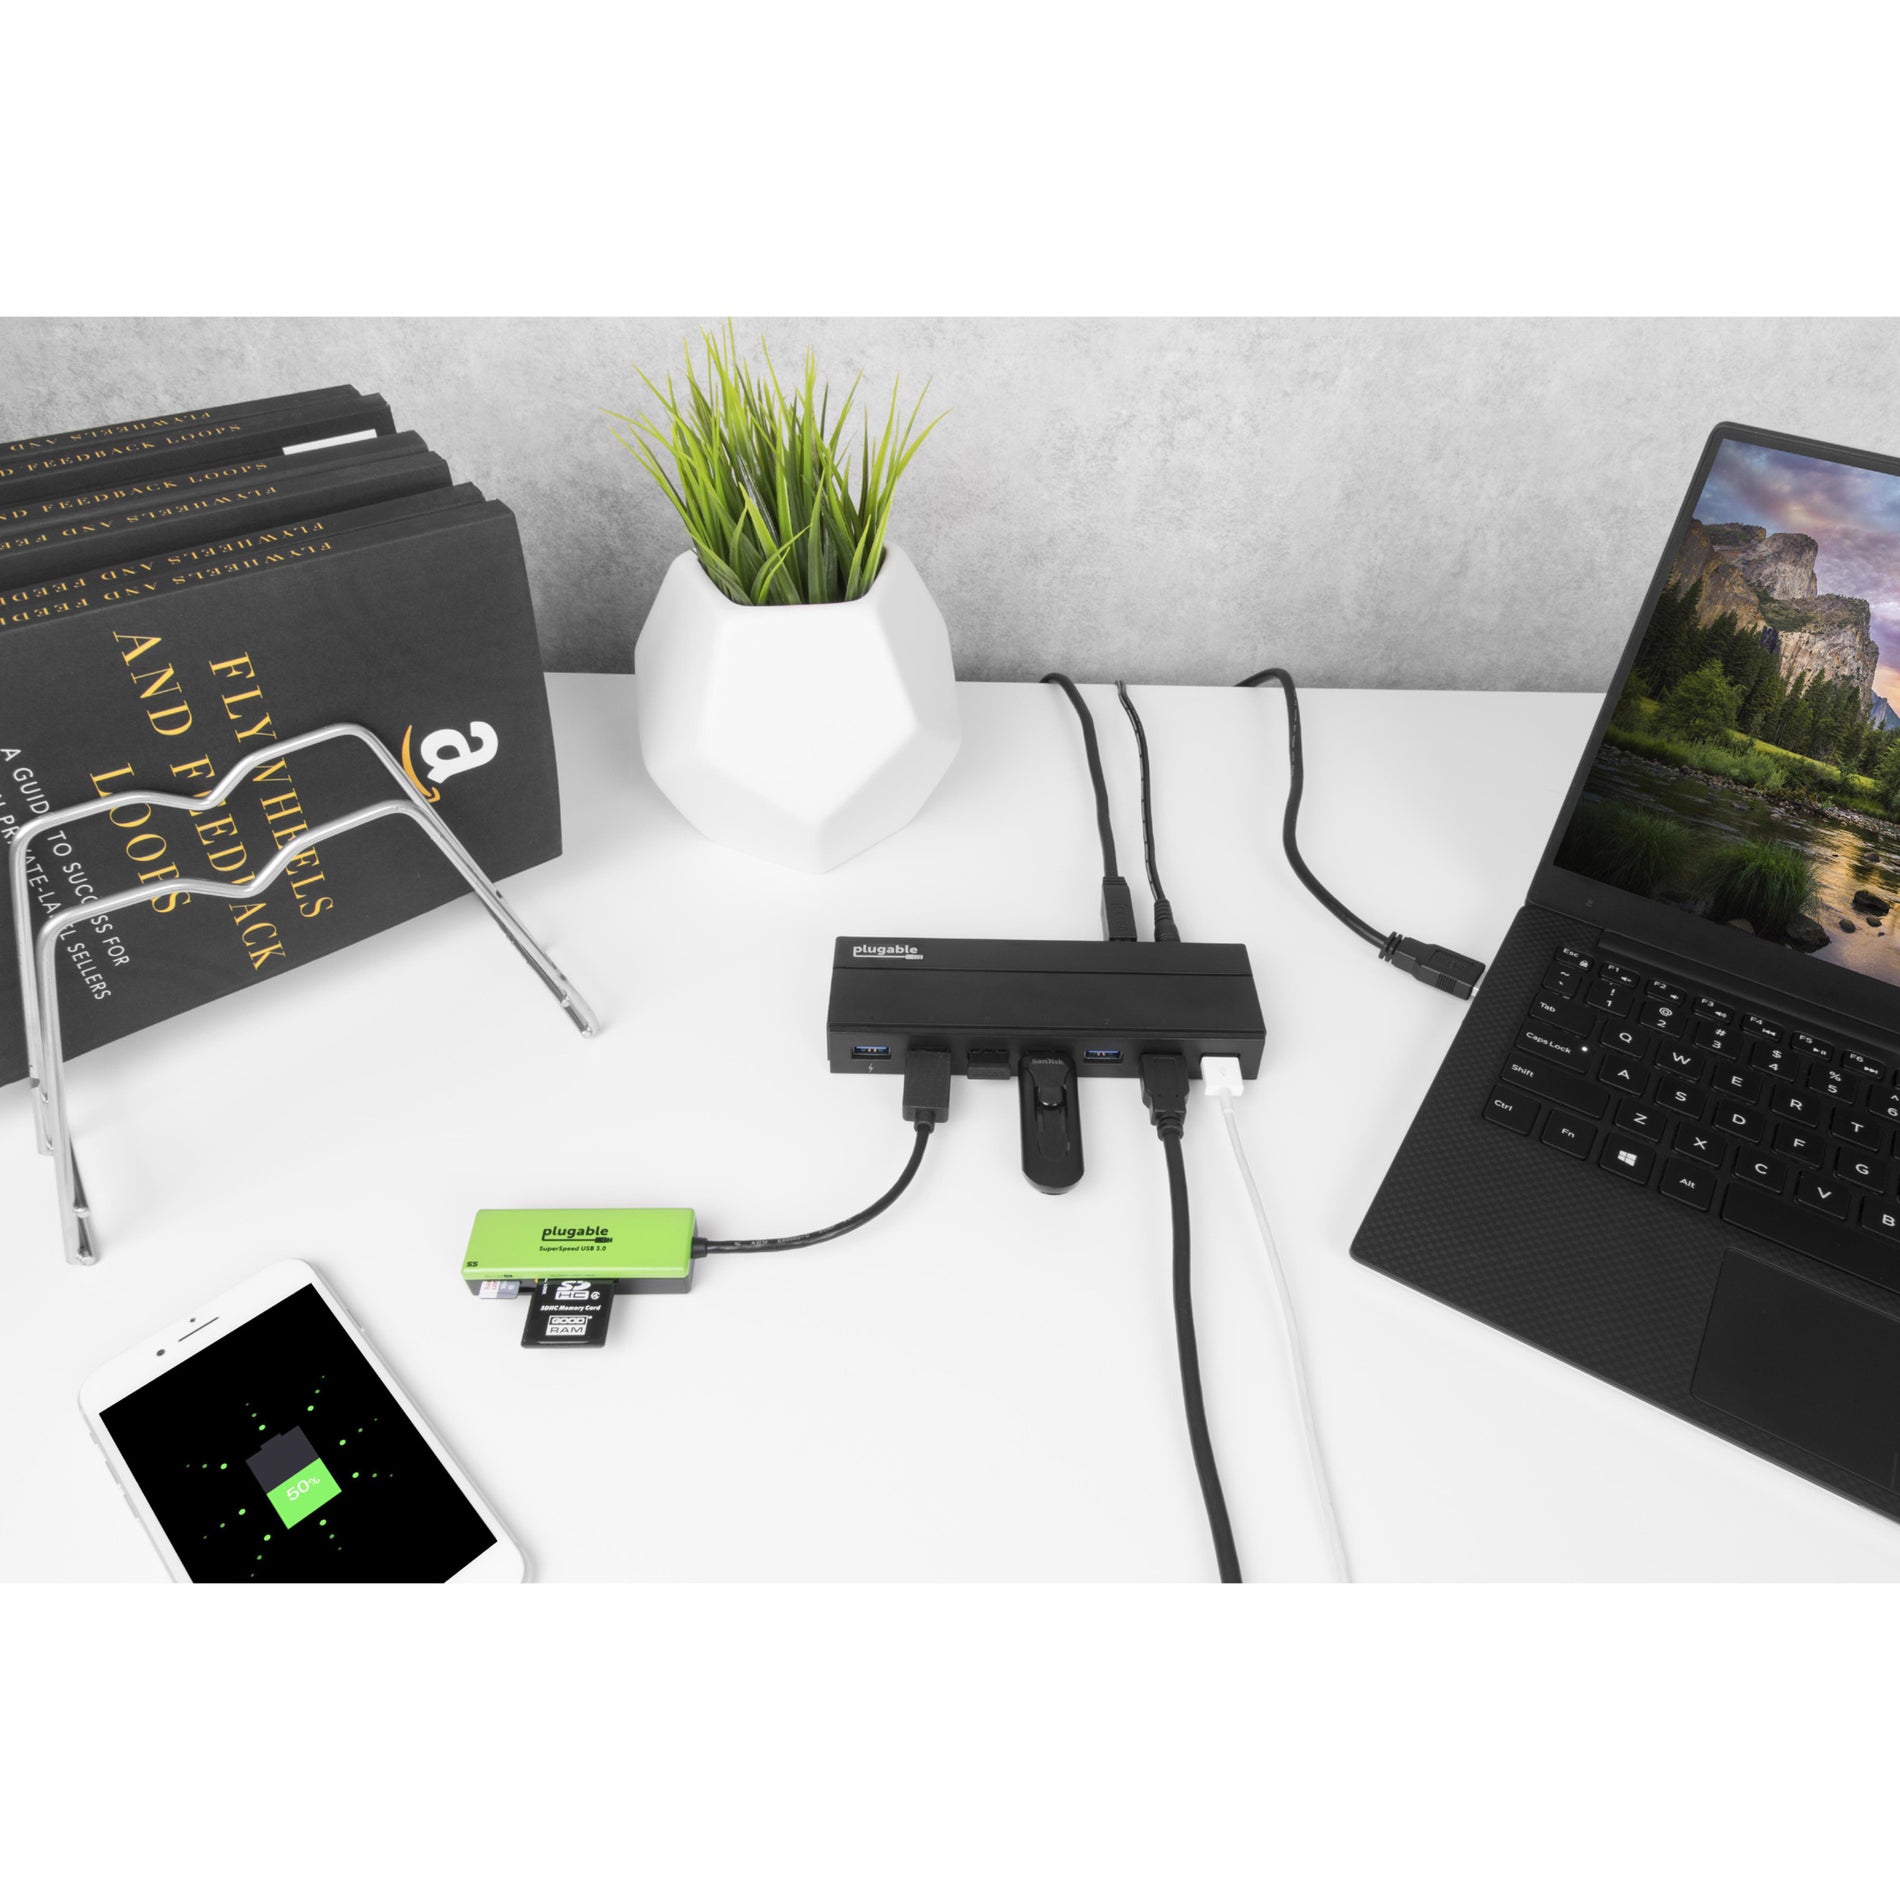 Plugable USB3-HUB7C USB 3.0 7-Port Hub with 36W Power Adapter Expand Your USB Connectivity